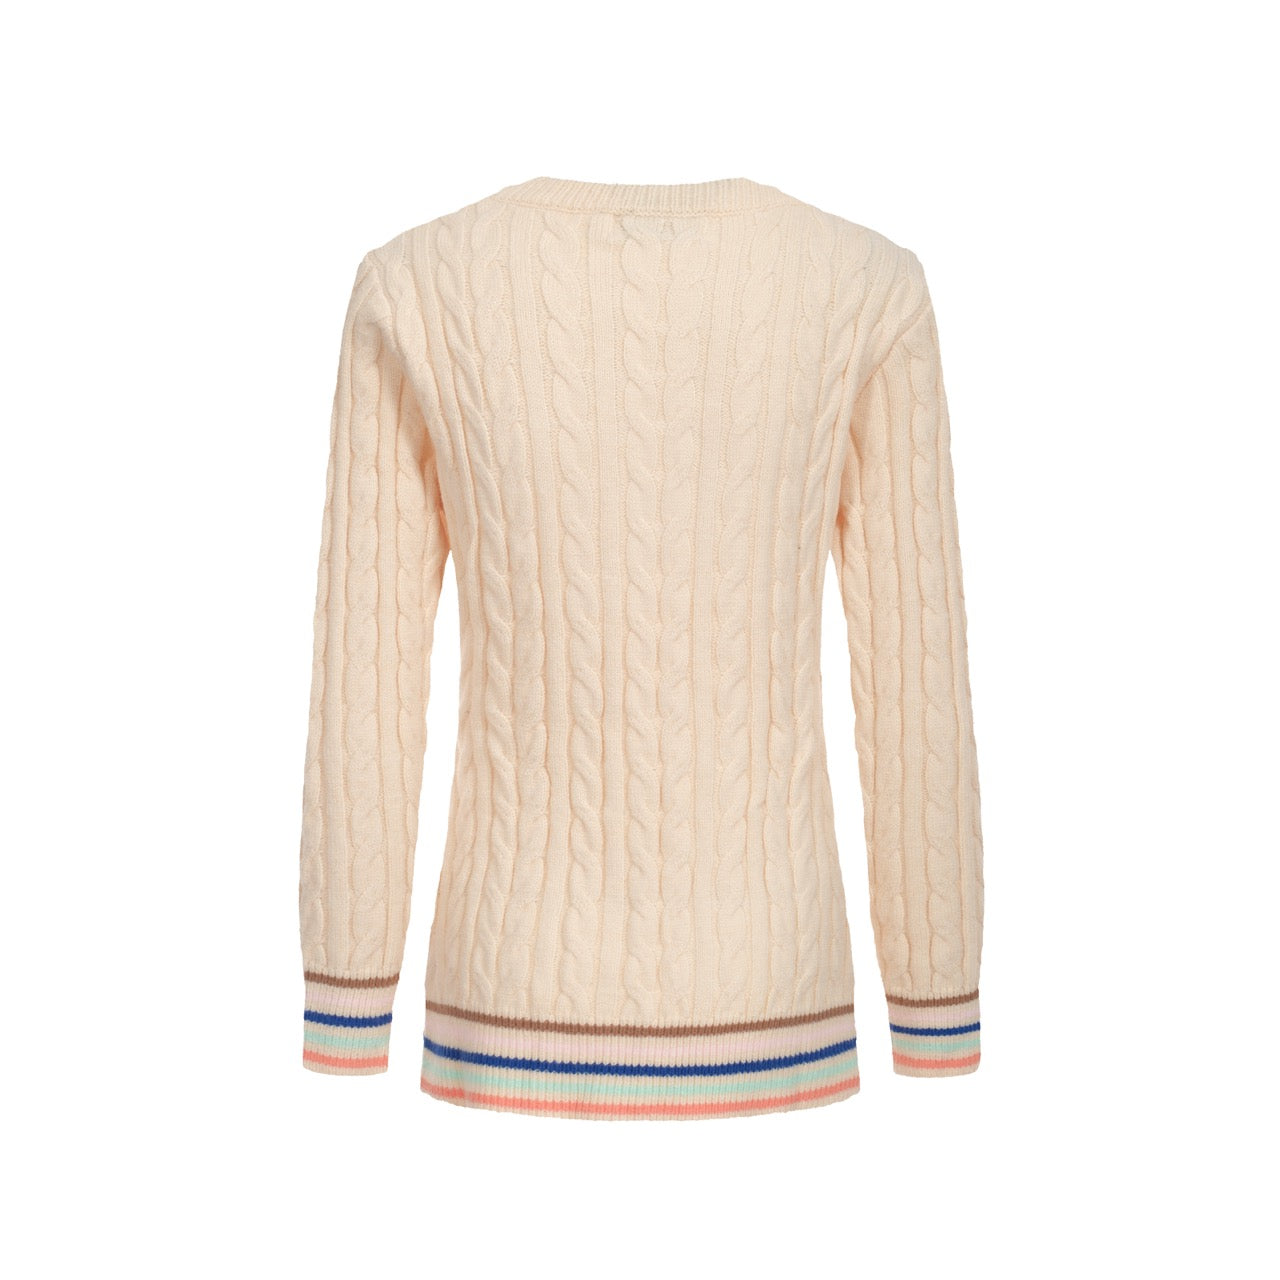 Women's Cream Cable Knitted Sweater